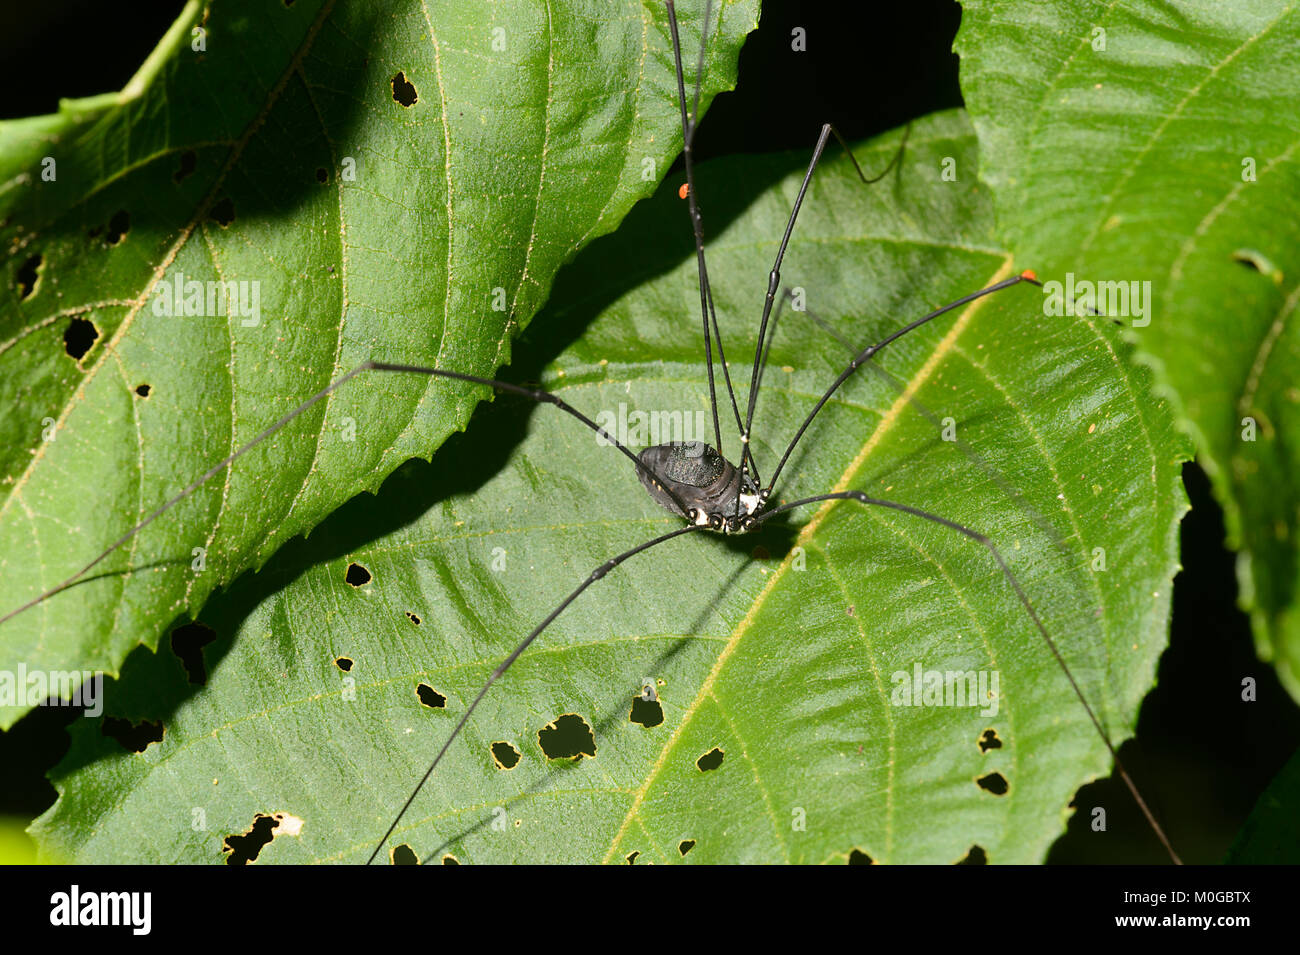 Close-up of a Daddy Long Legs Spider with a mite, Danum Valley Conservation Area, Borneo, Sabah, Malaysia Stock Photo